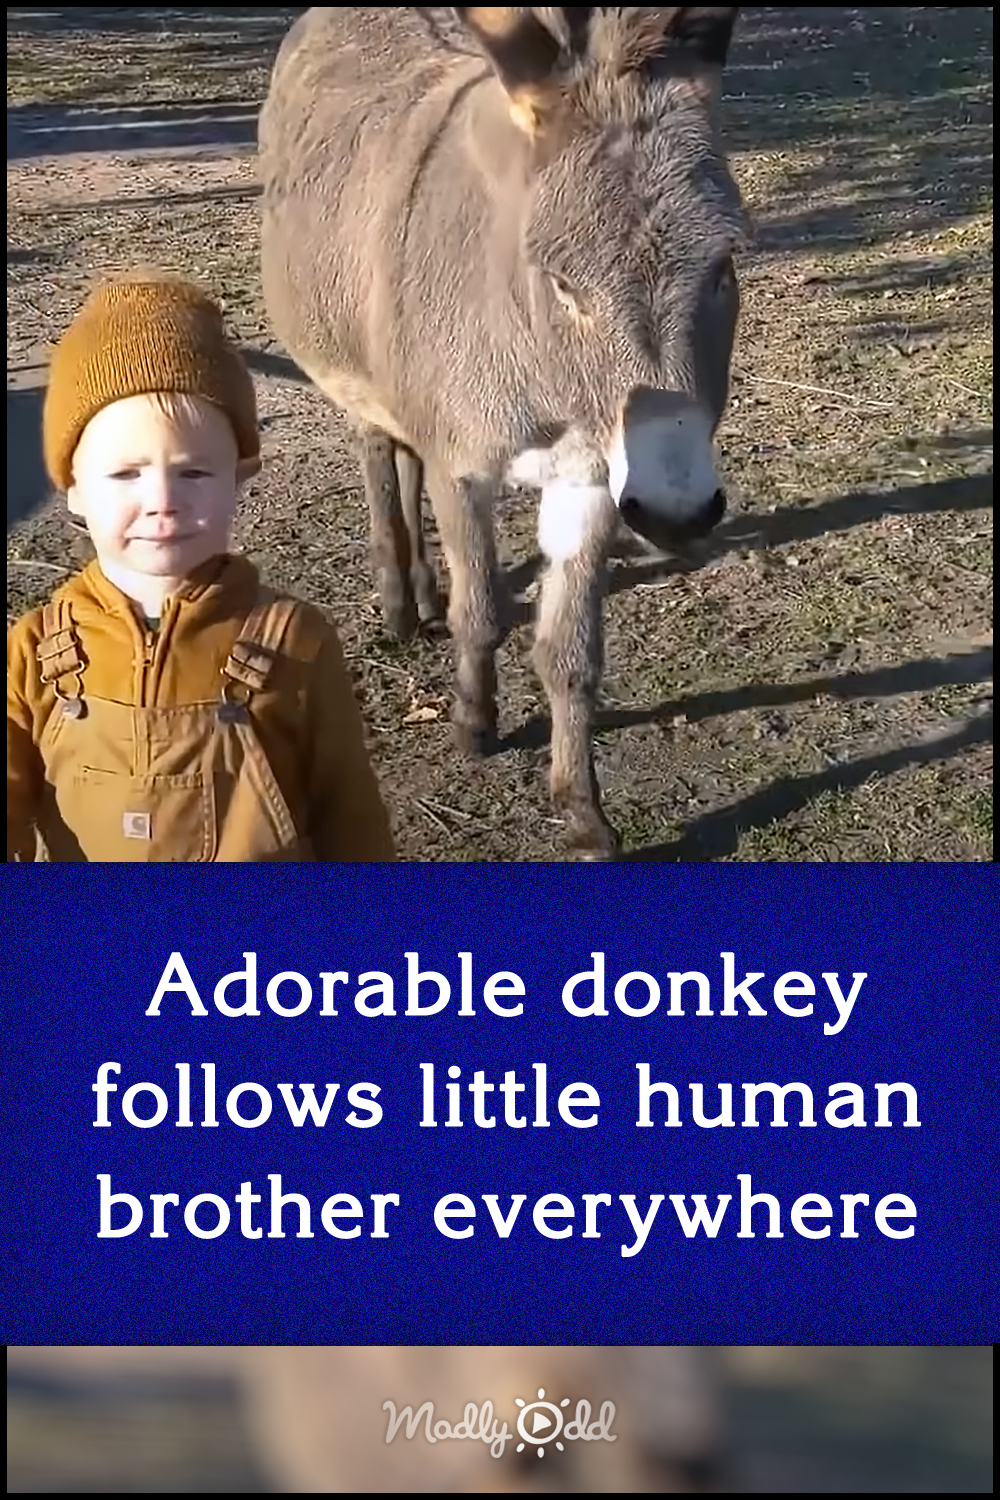 Adorable donkey follows little human brother everywhere